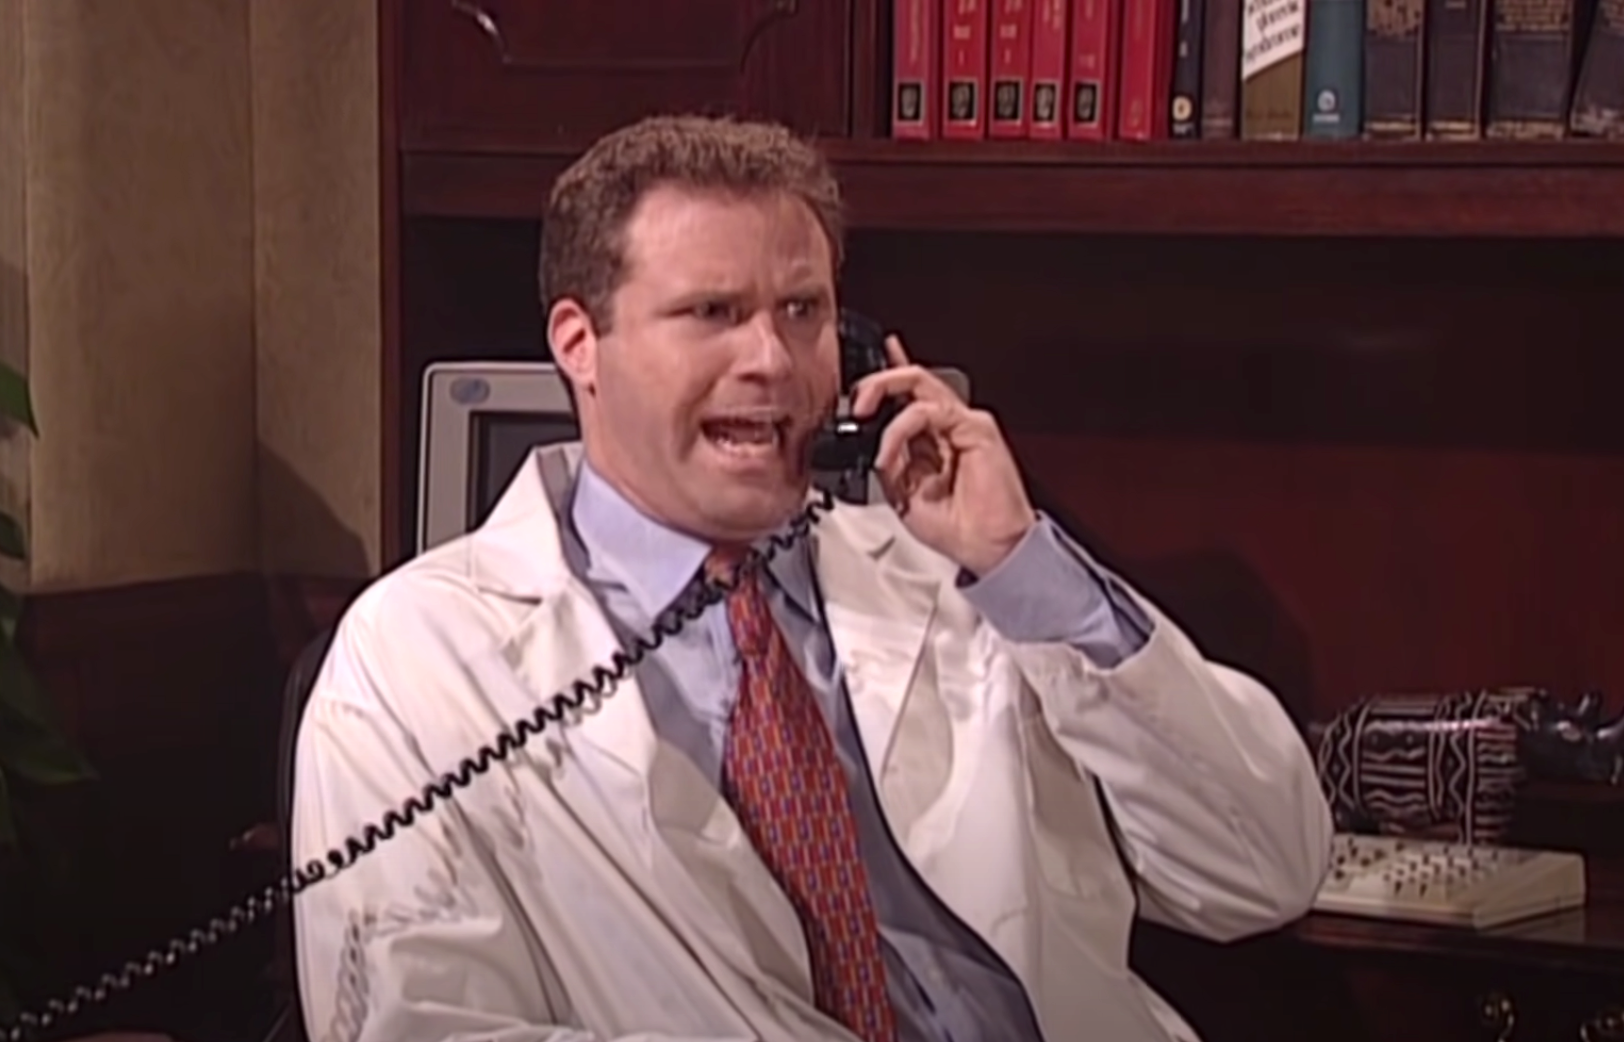 Will Ferrel as an angry doctor on the phone